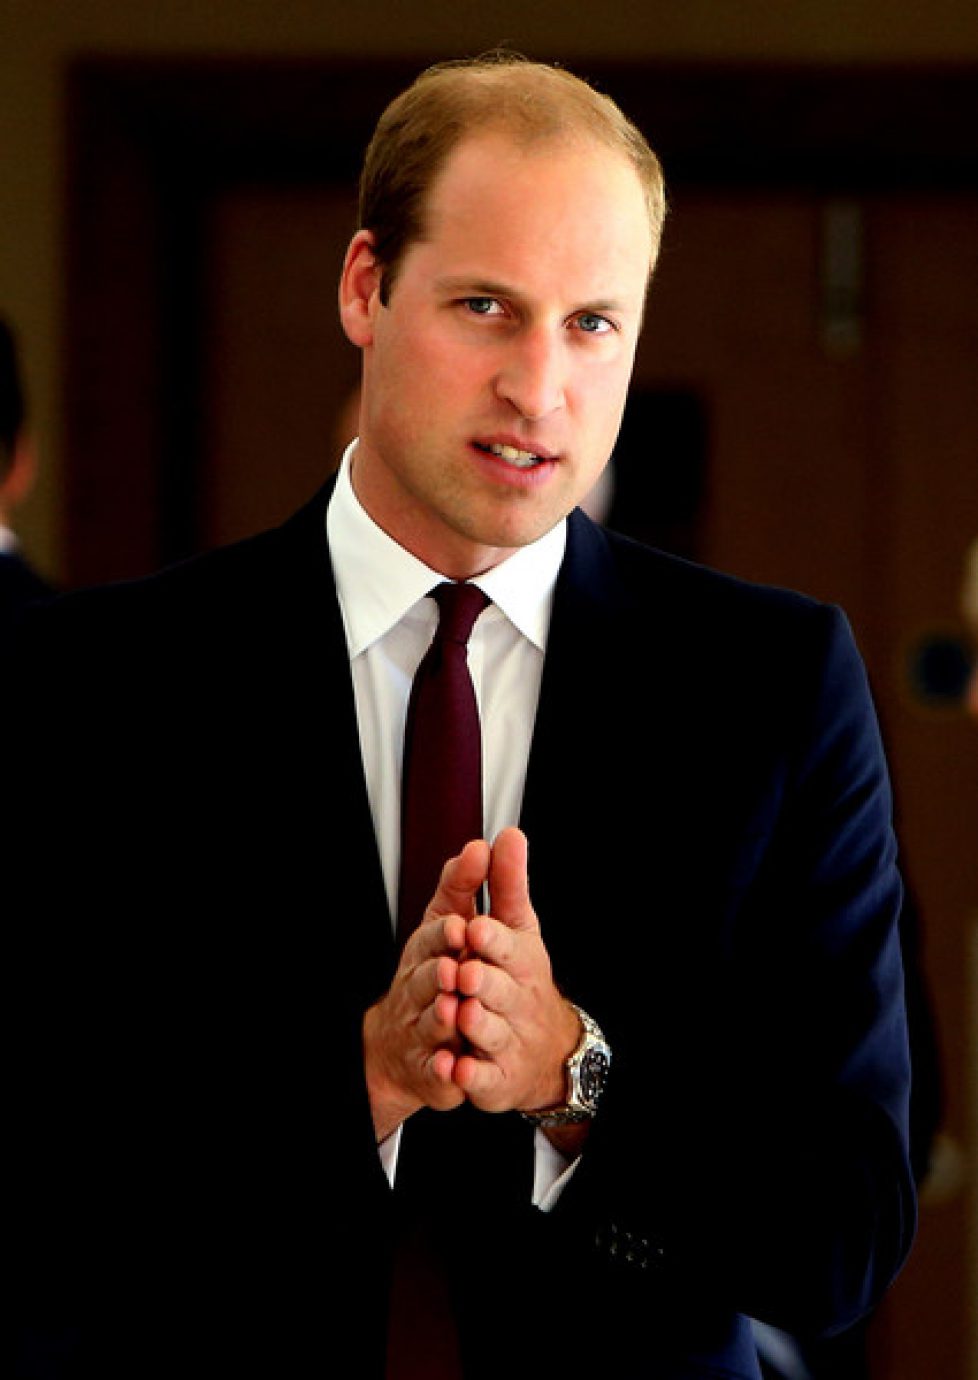 Prince+William+Visits+National+Sport+Centre+2Cpf7M7LEi5l